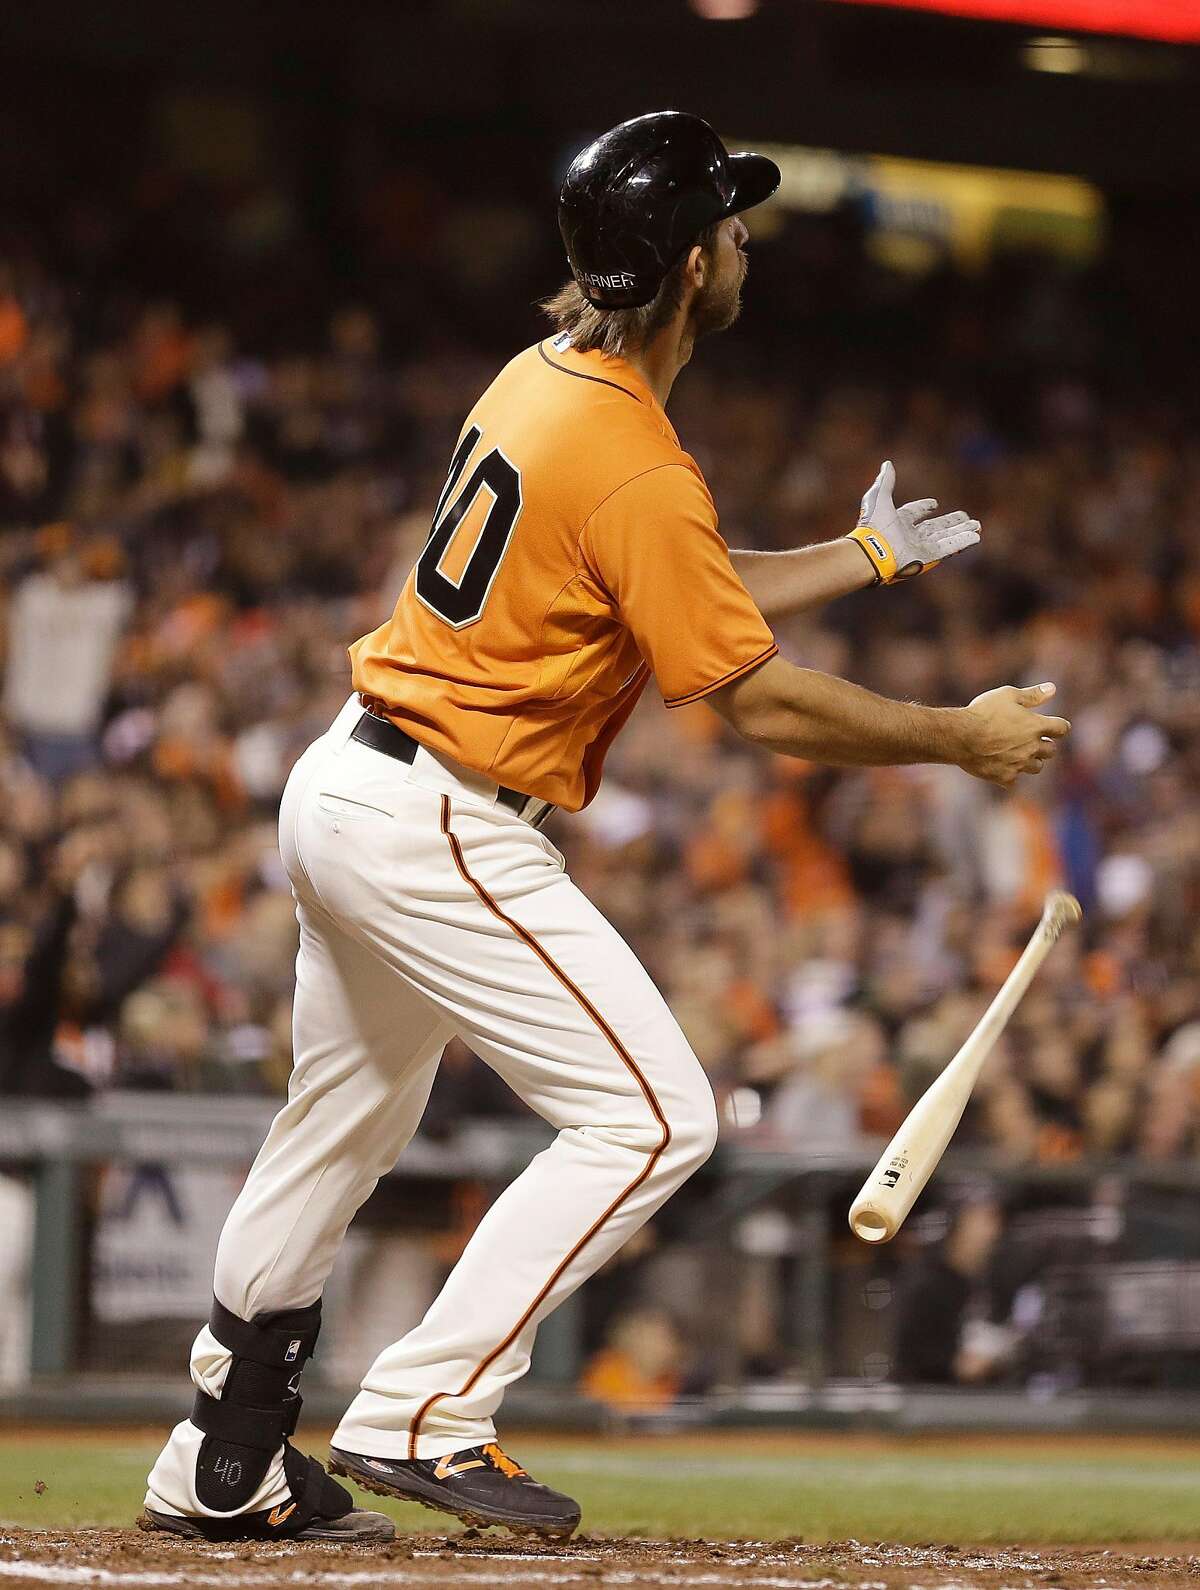 Madison Bumgarner launches a GRAND SLAM to left field 